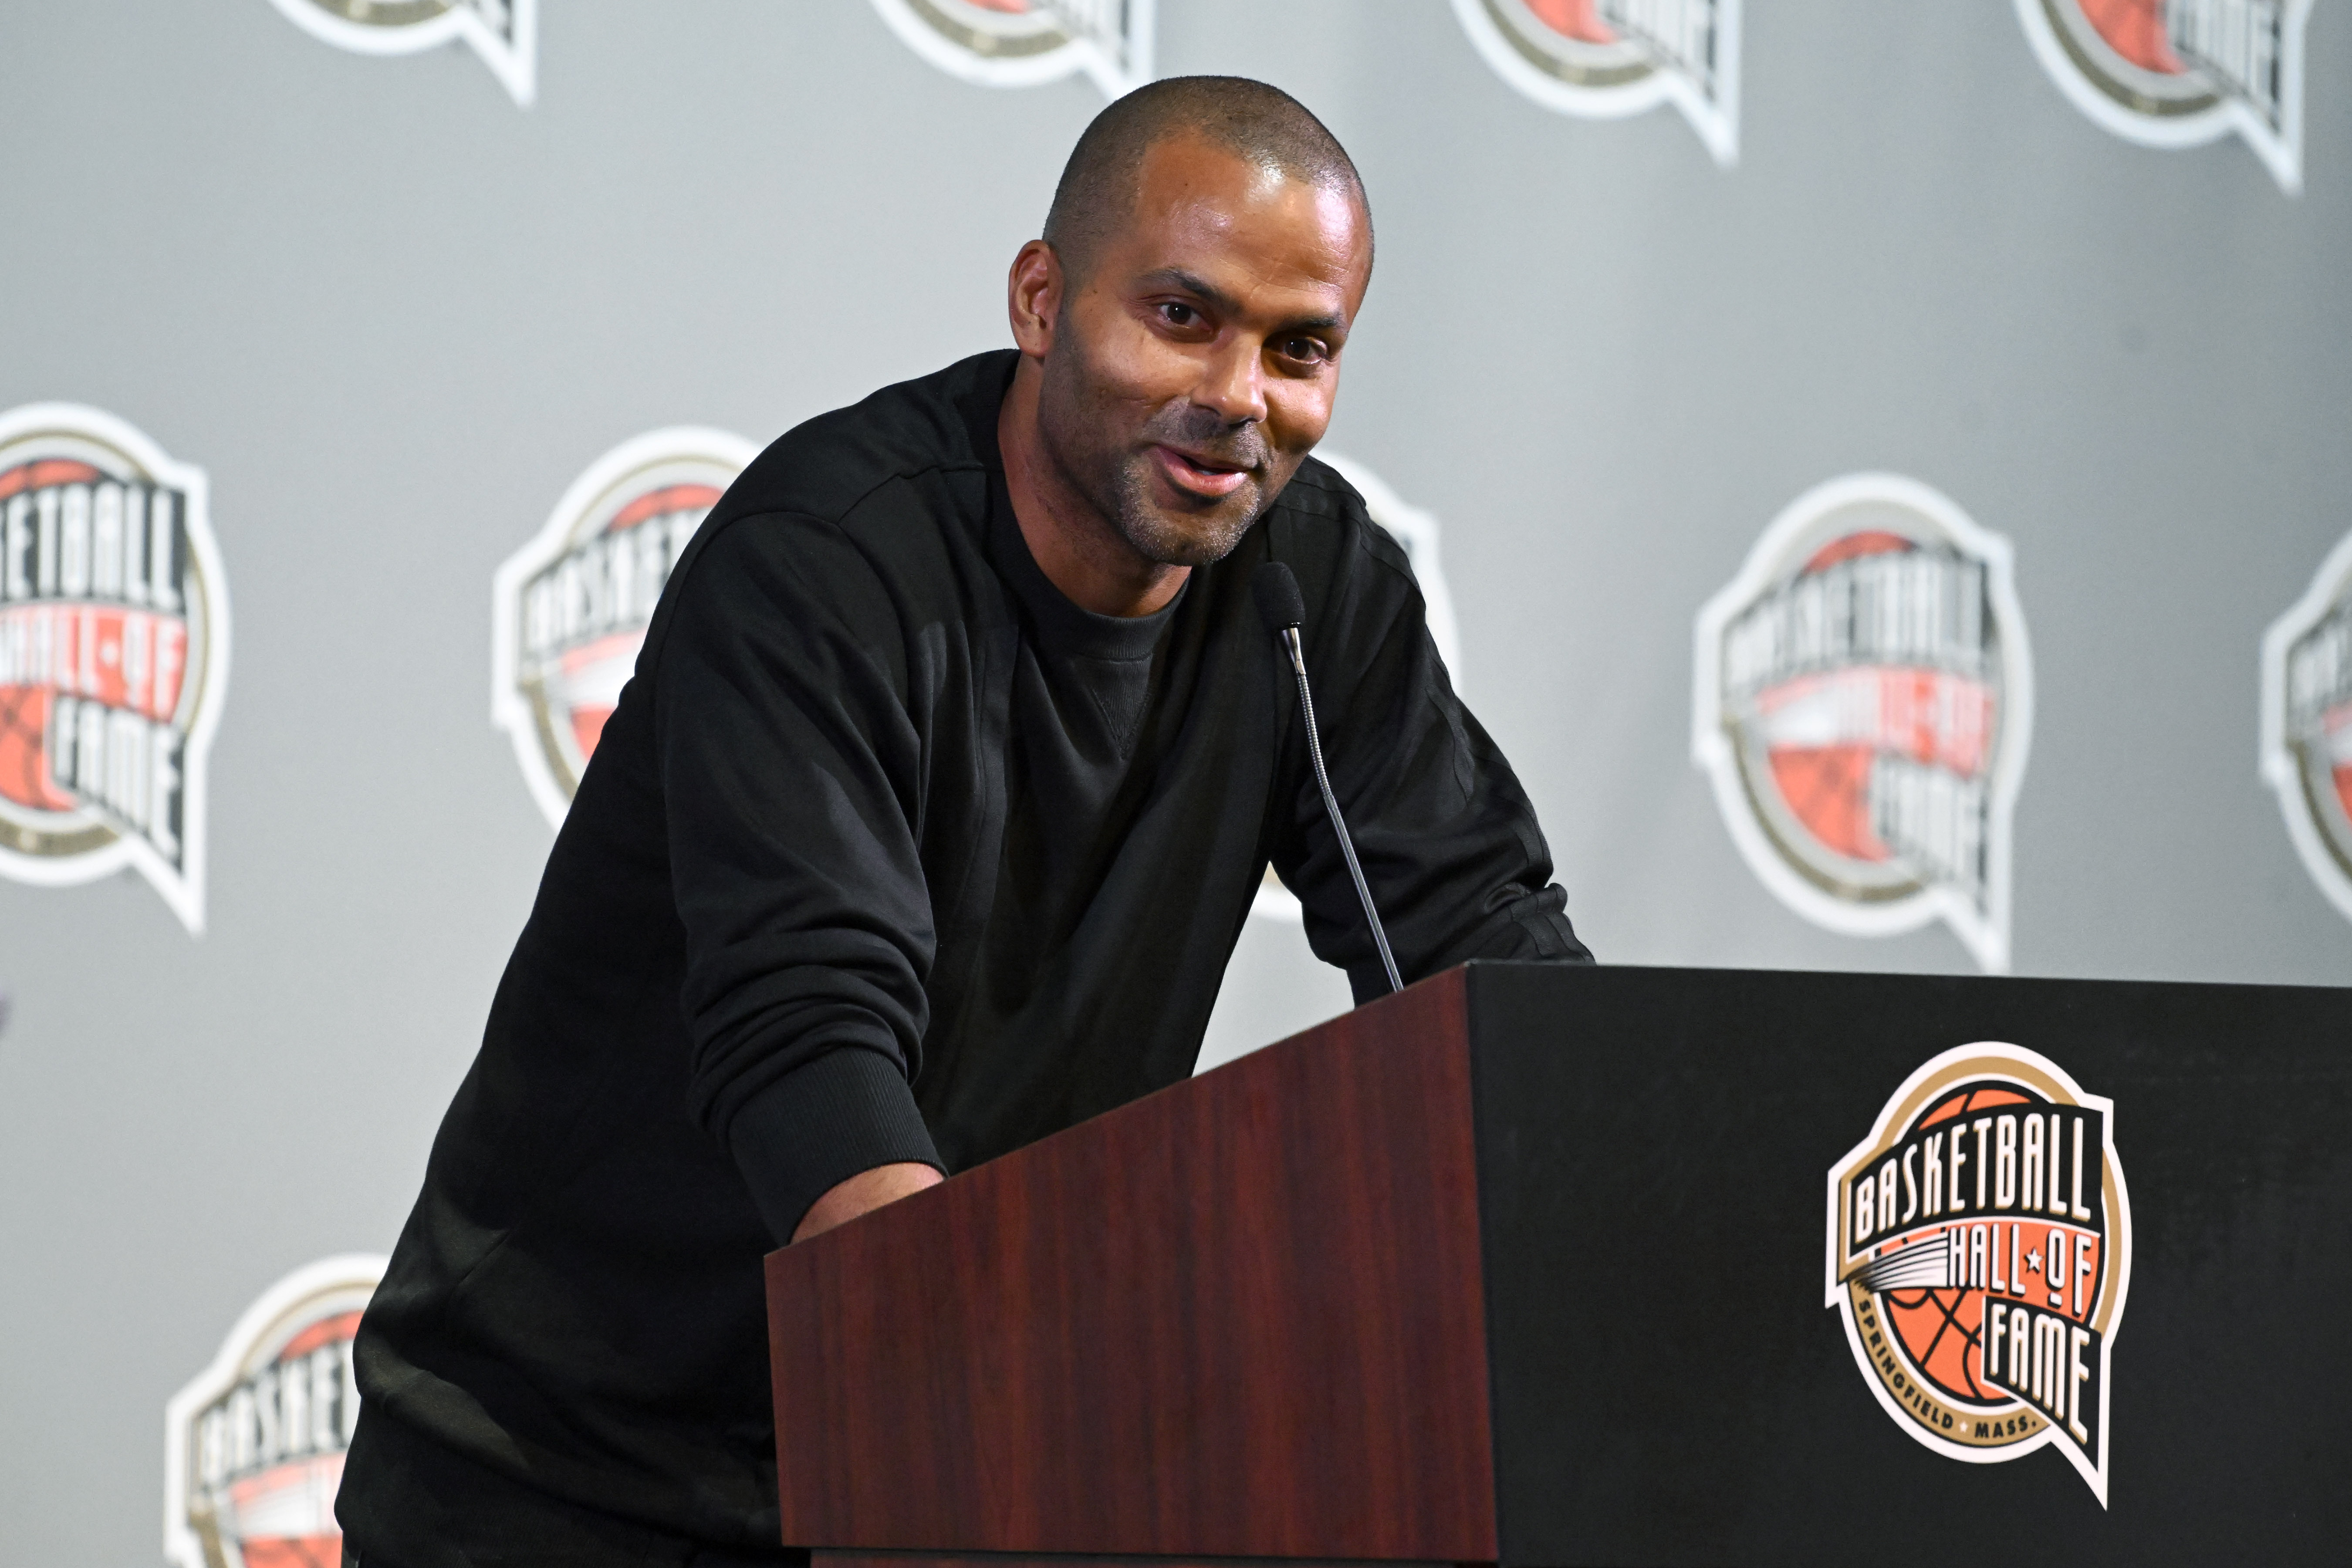 Tony Parker has always dreamed big en route to the Basketball Hall of Fame